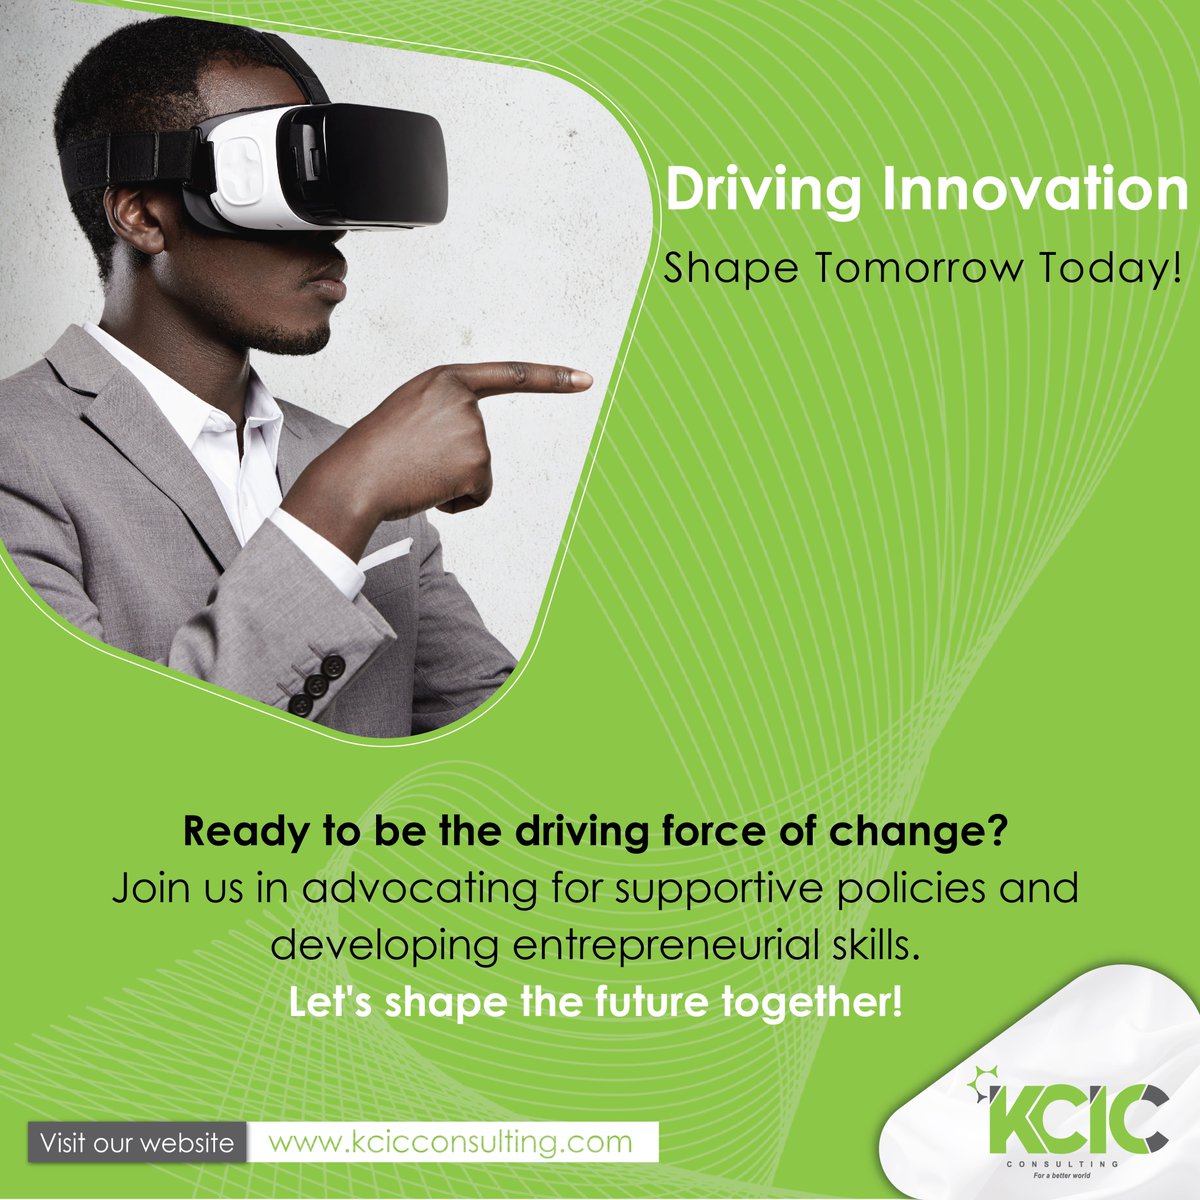 Drive change through policy advocacy with KCL's expertise. Learn how we shape supportive entrepreneurial ecosystems at kcicconsulting.com. #PolicyEngagement #Innovation #EntrepreneurialEcosystem @KCLPrivateSector